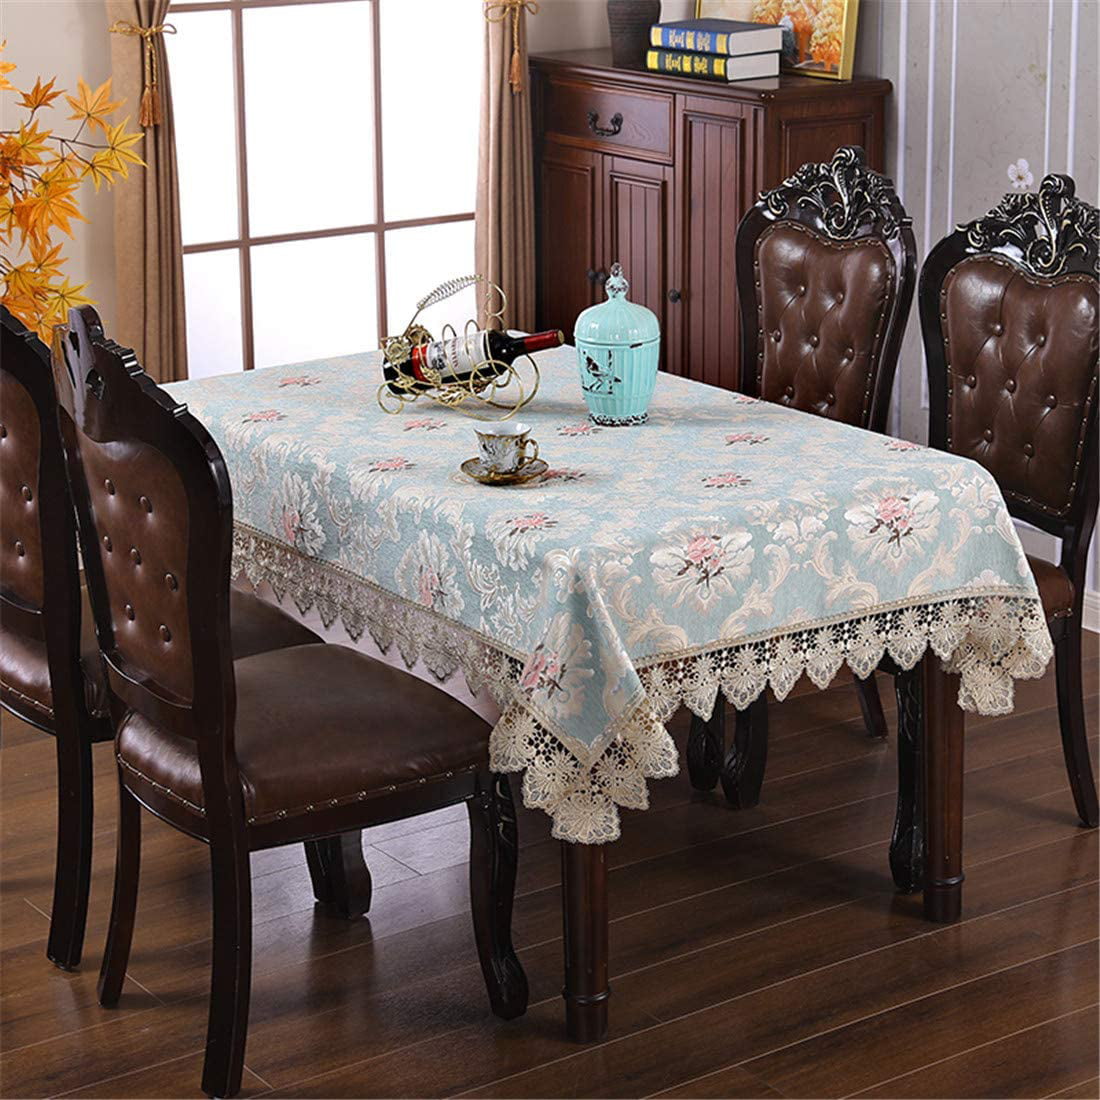 Small Square Lace Blue Tablecloth Embroidered Table Cover Coffee Table Cloth for 